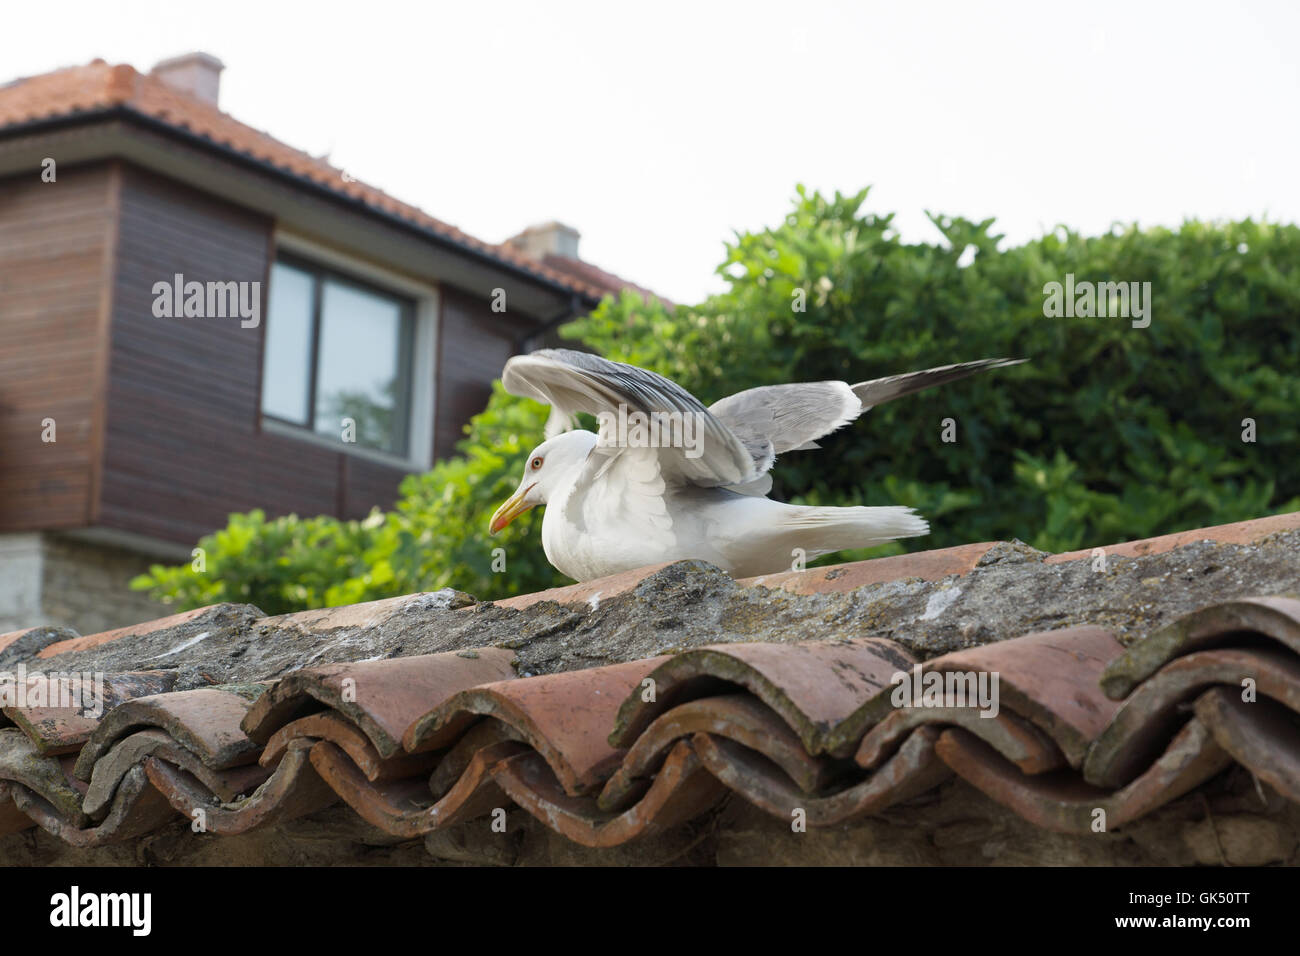 large seagull walking on the tiles fence Stock Photo